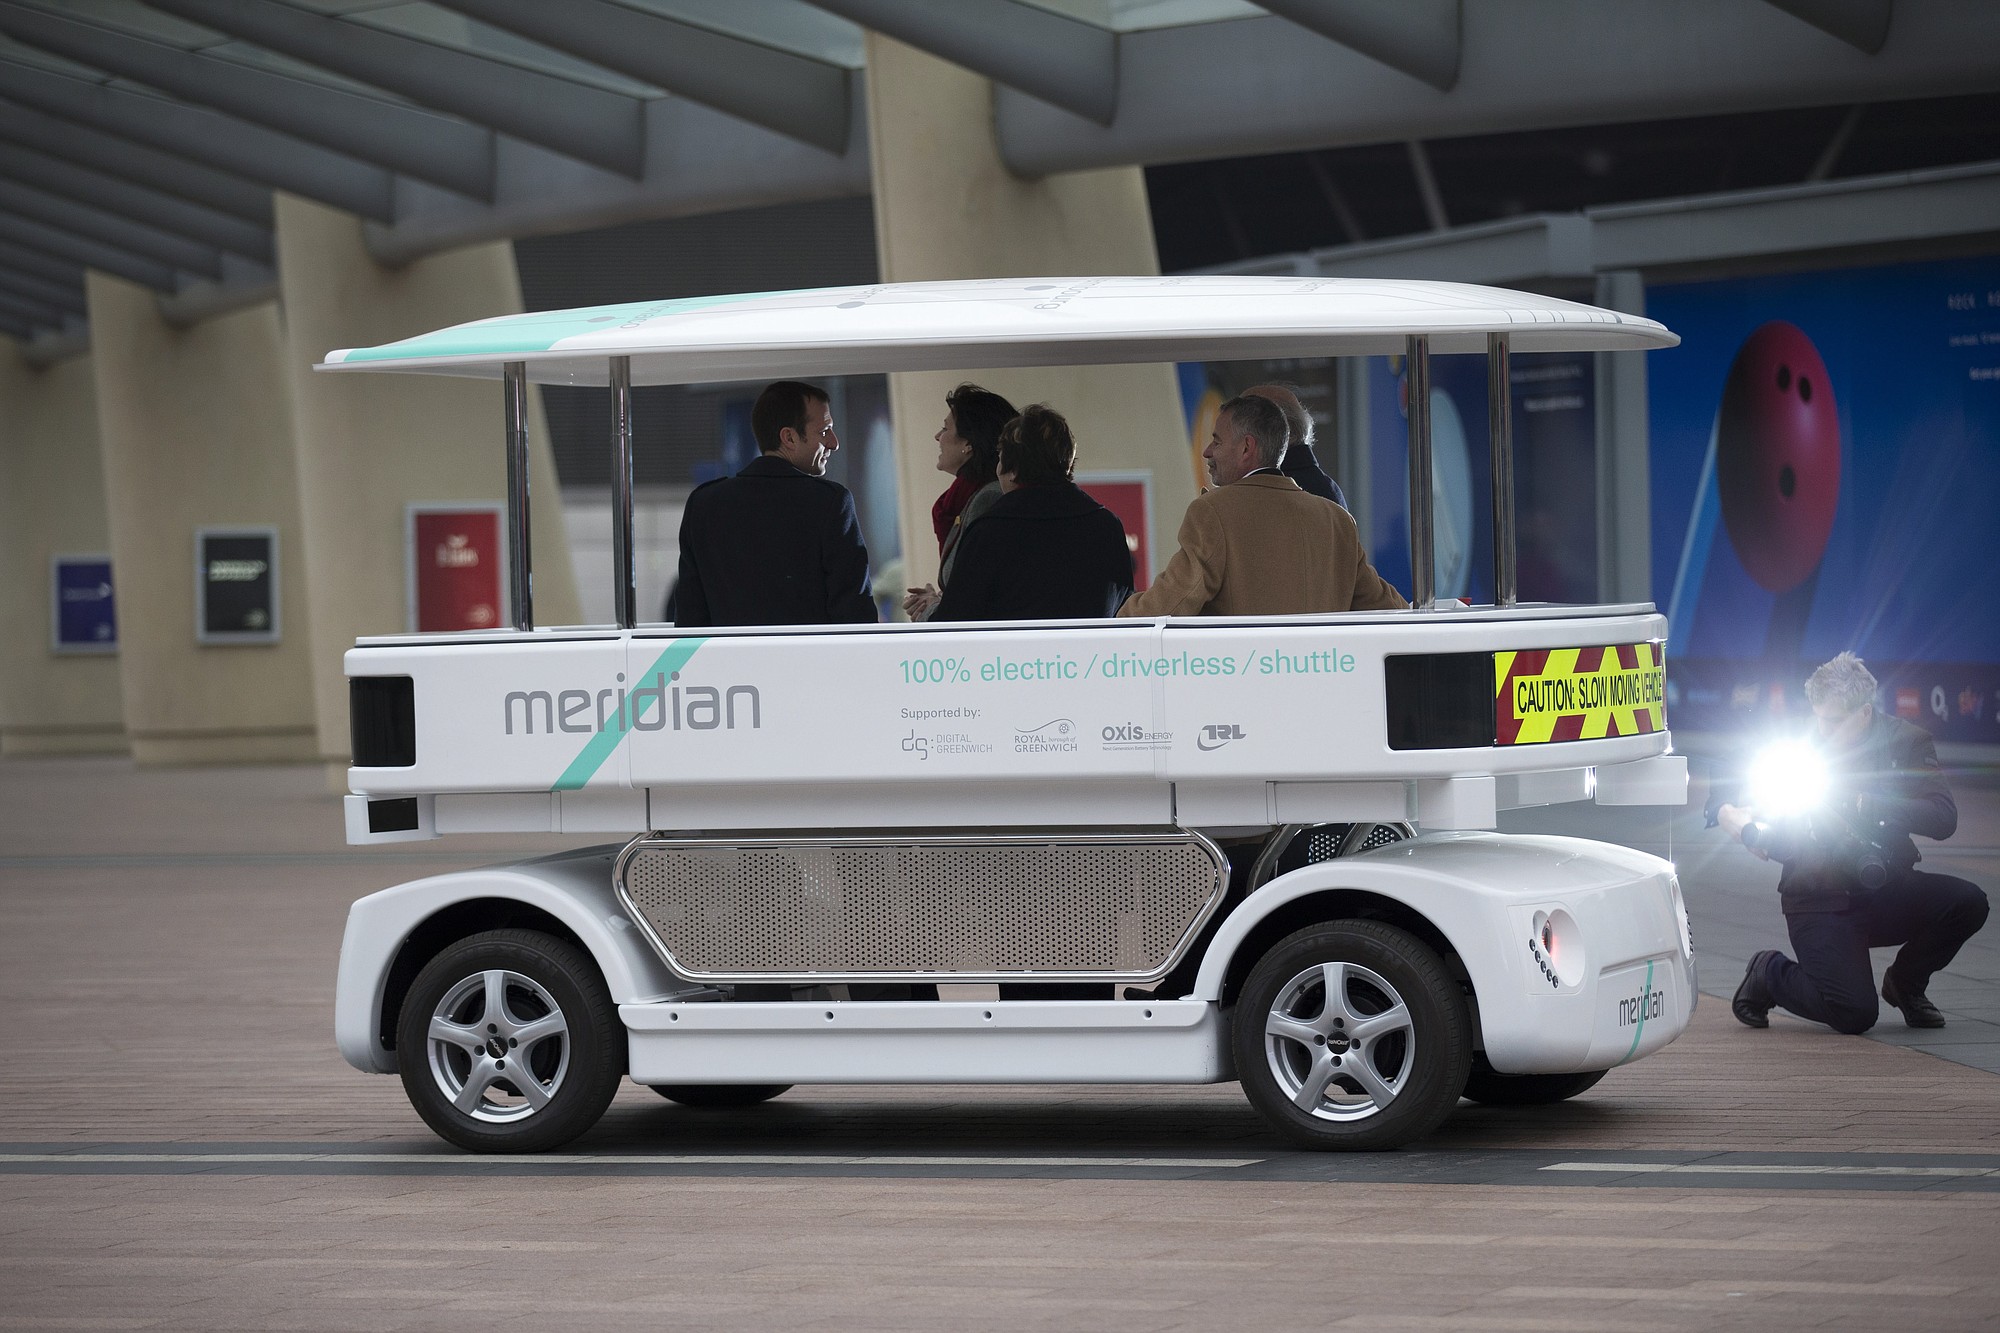 Photos by MATT DUNHAM/Associated Press
Dignitaries try out a prototype driverless car called a Meridian shuttle Wednesday in London.